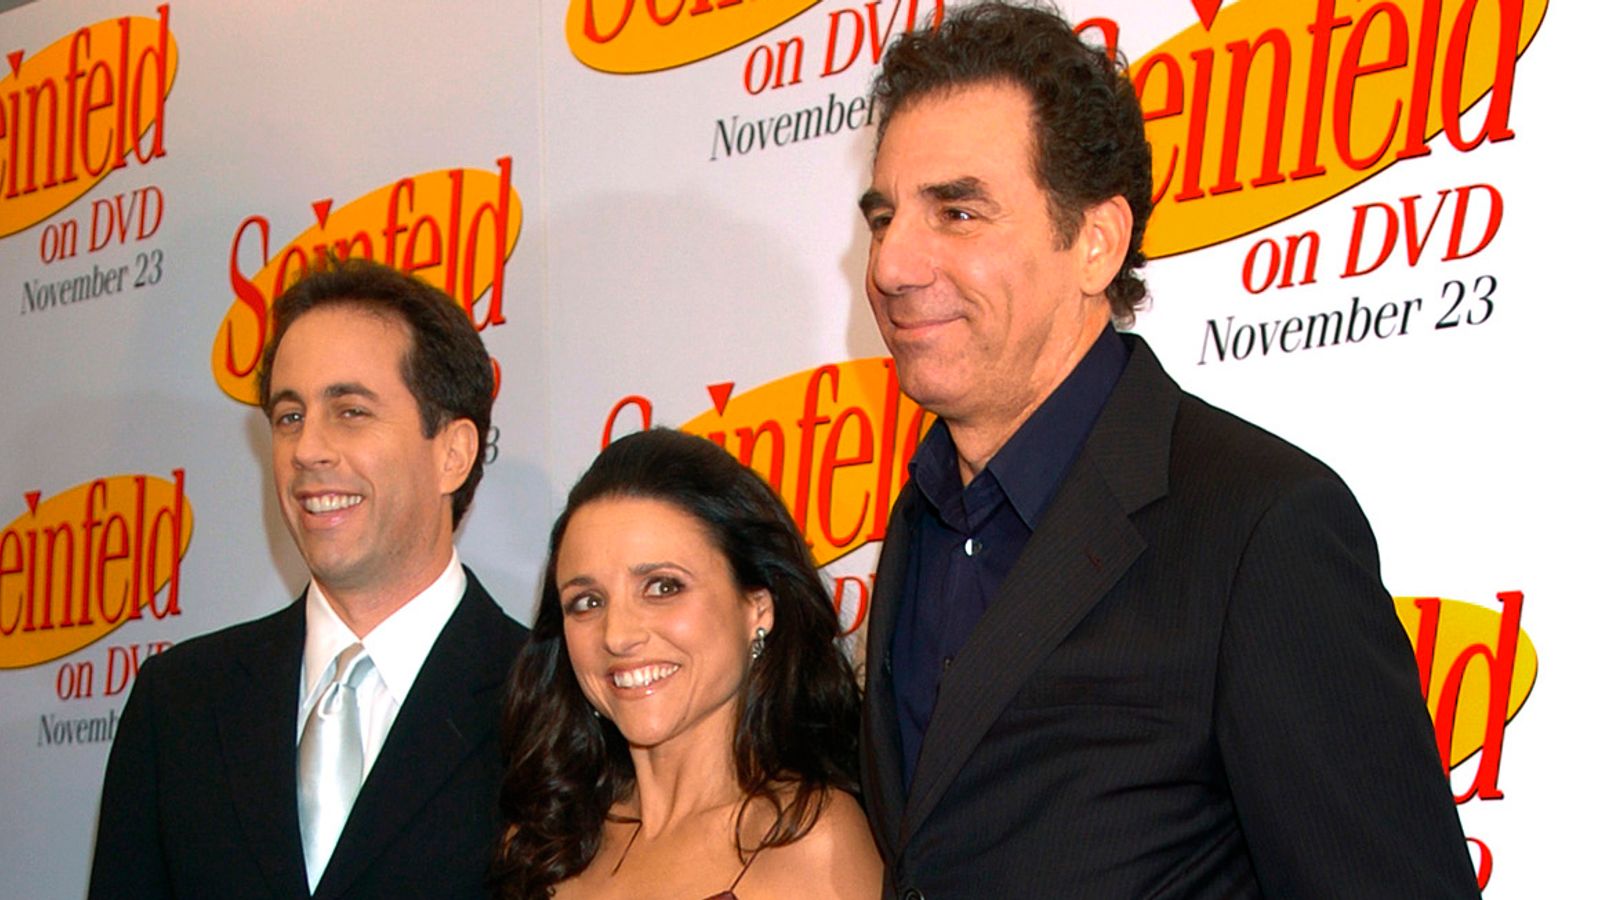 Jerry Seinfeld hints at TV show reunion, saying 'something is going to happen' 25 years after its finale